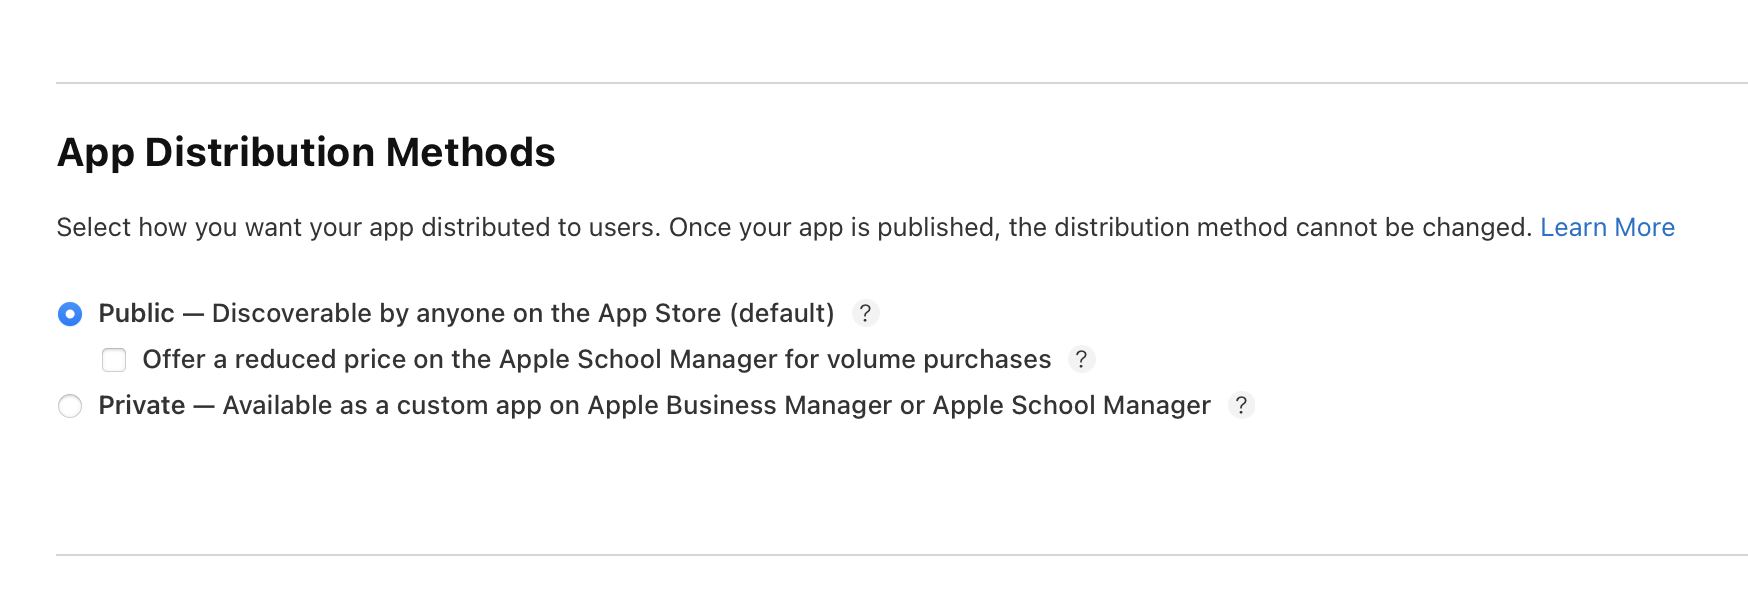 App Distribution Methods section of the Pricing and Availability page. Public option is selected.